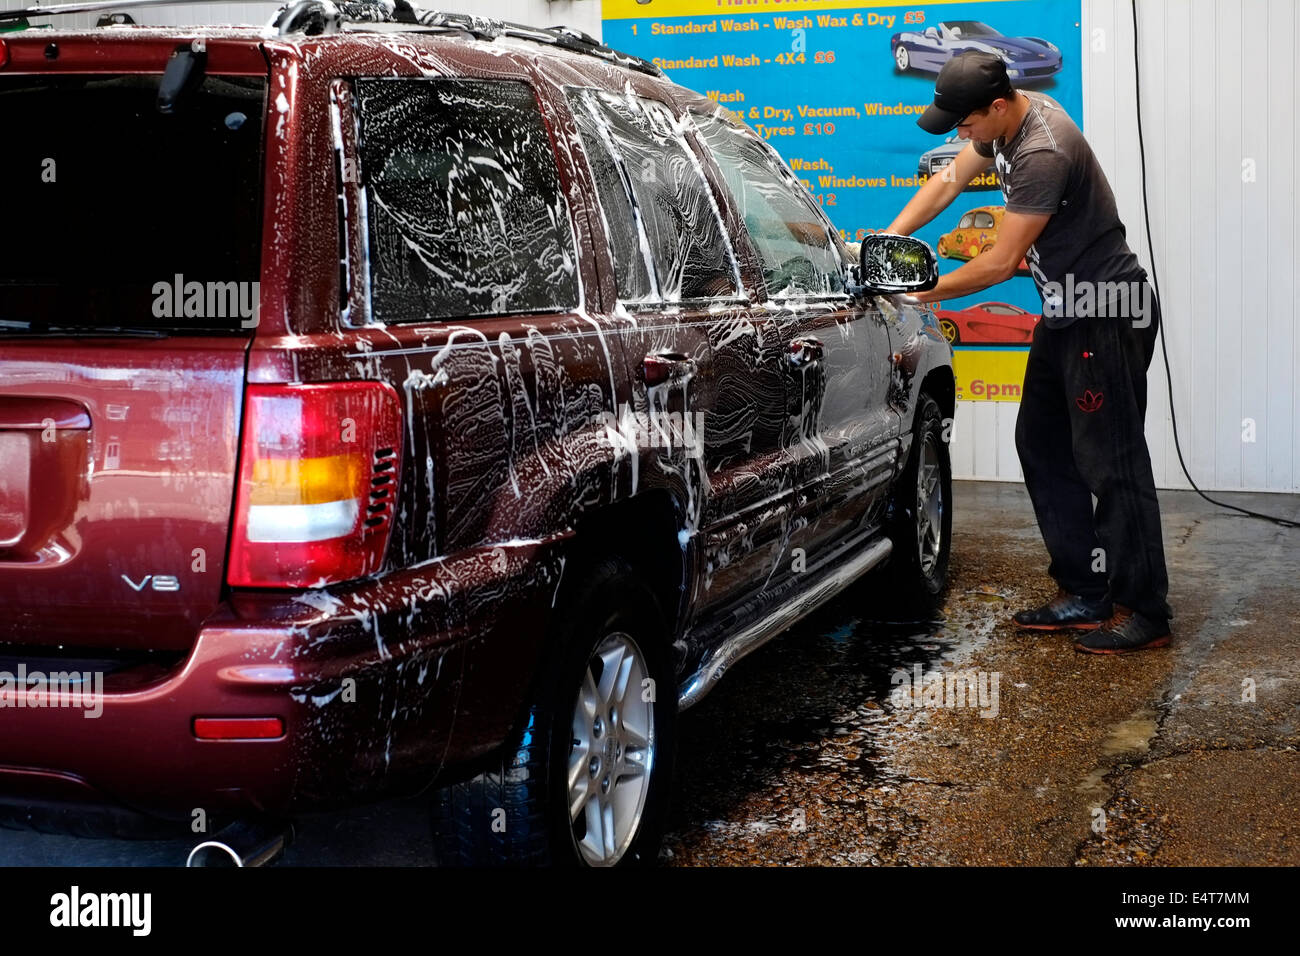 east european immigrants hand washing a car at their car cleaning business england uk Stock Photo